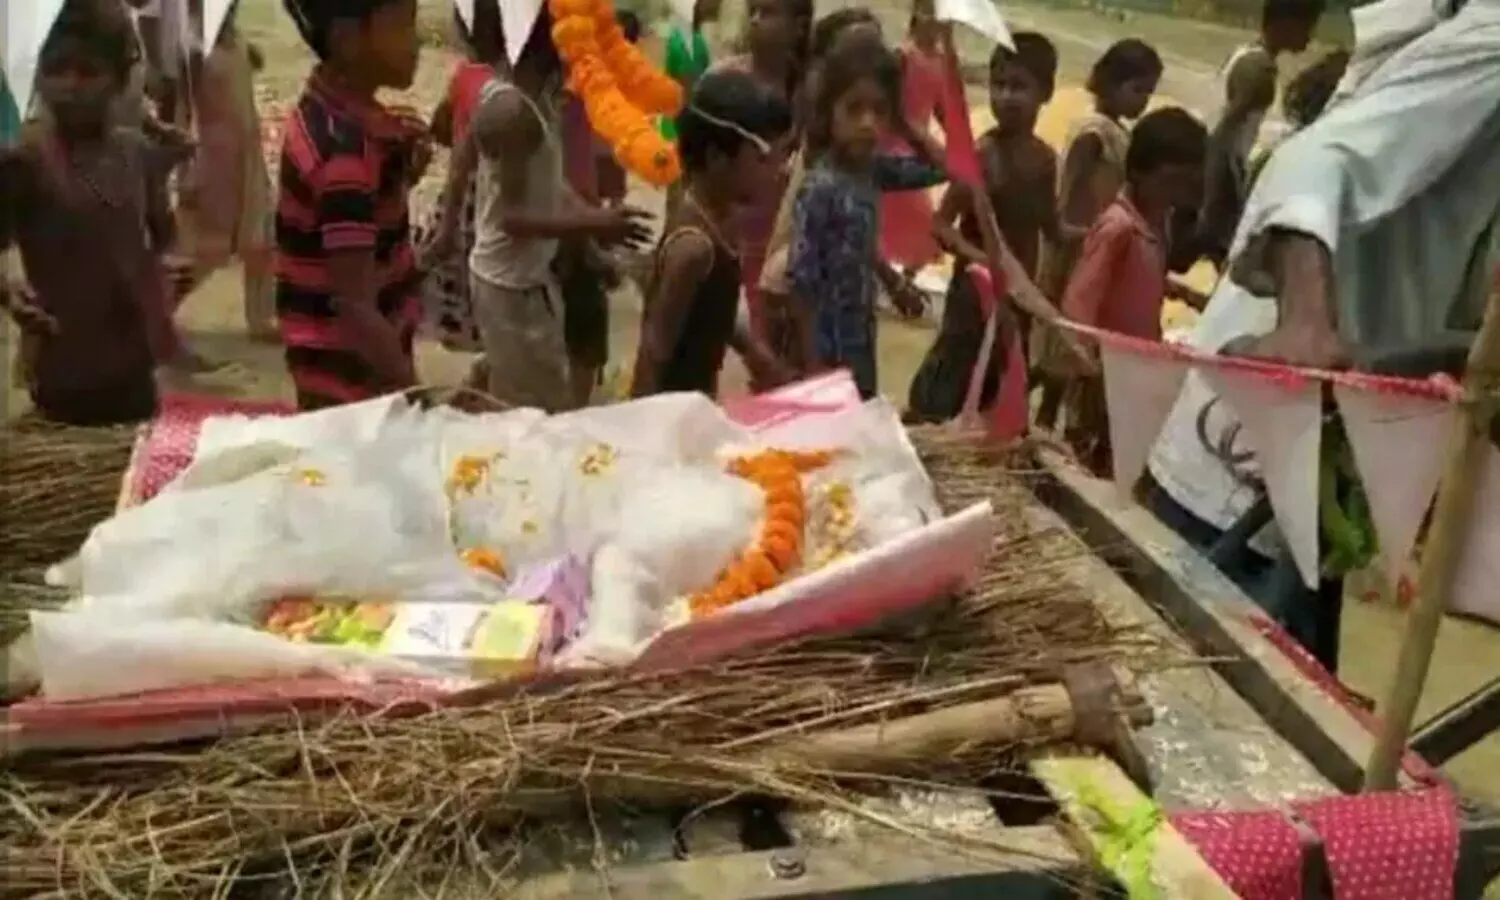 owner performed the last rites on the death of the dog